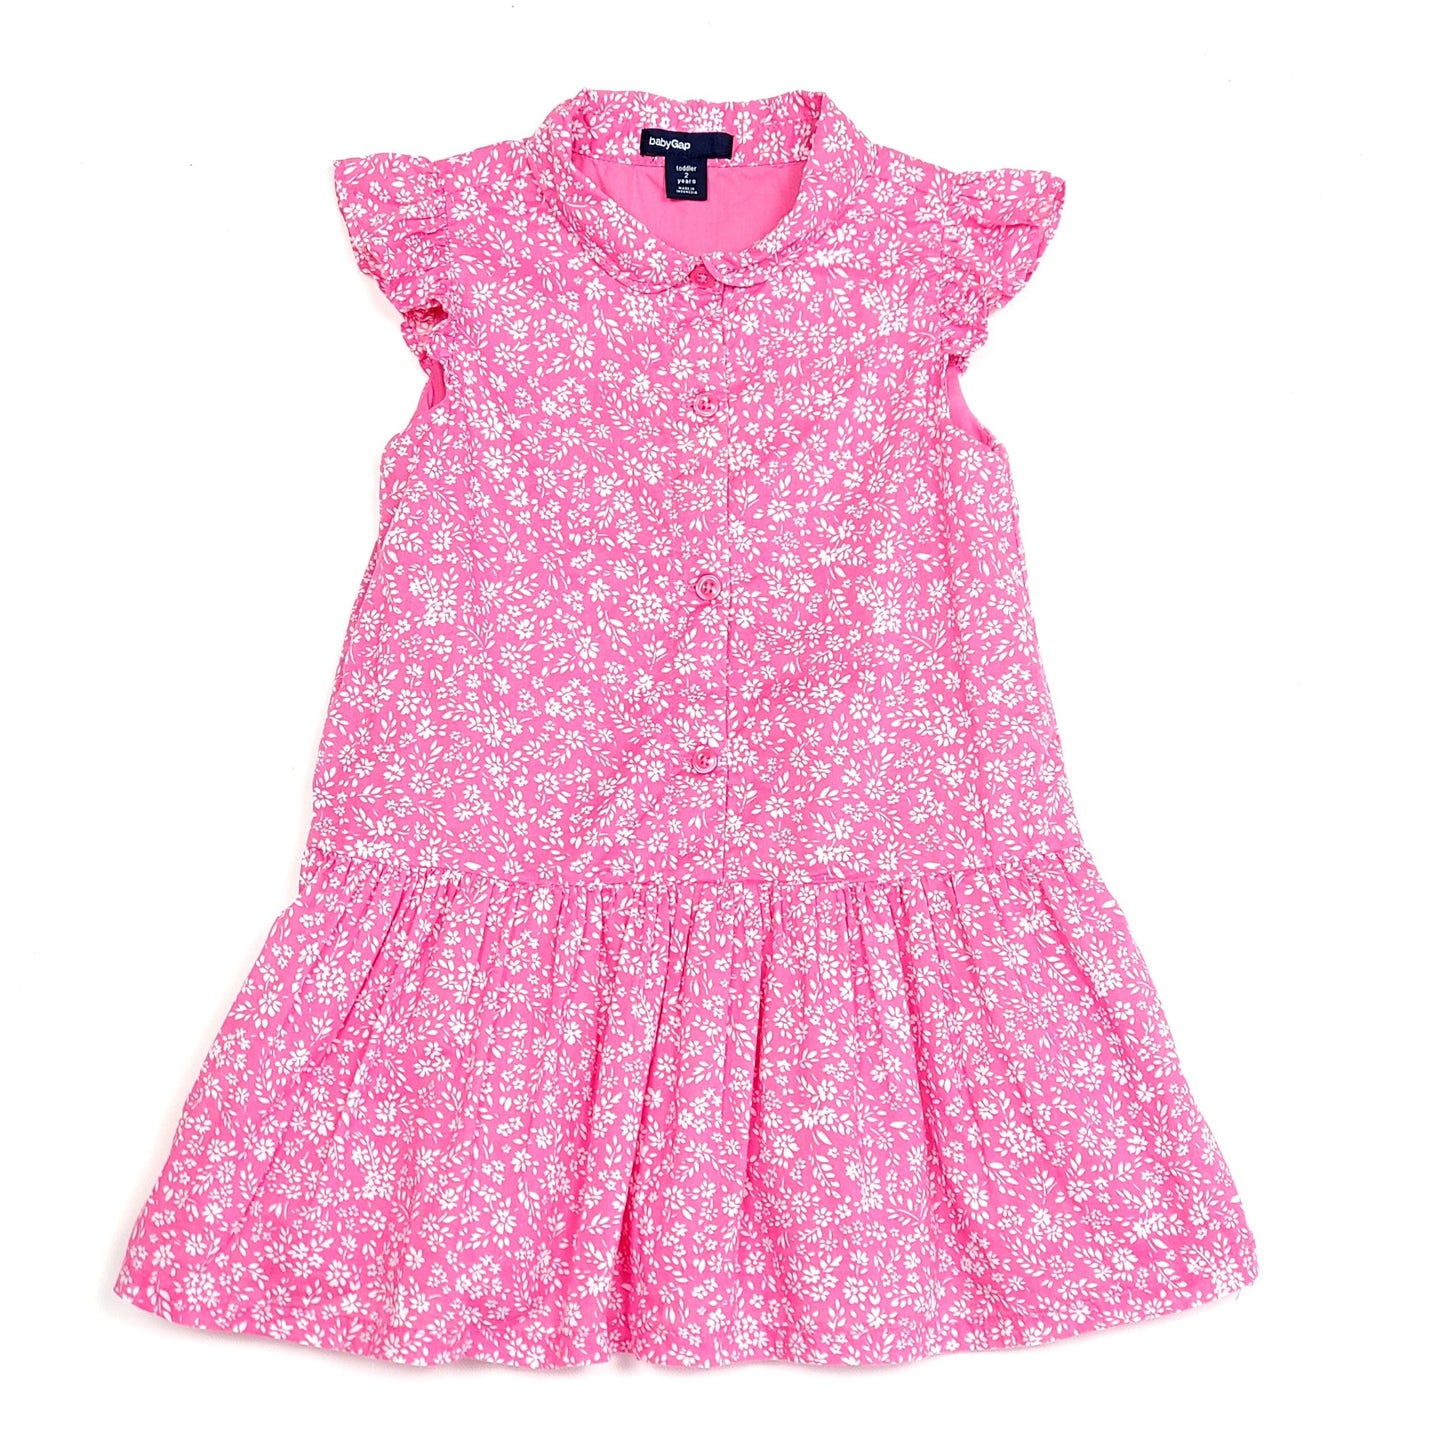 Baby Gap Girls Pink White Floral Dress 2T Used, front